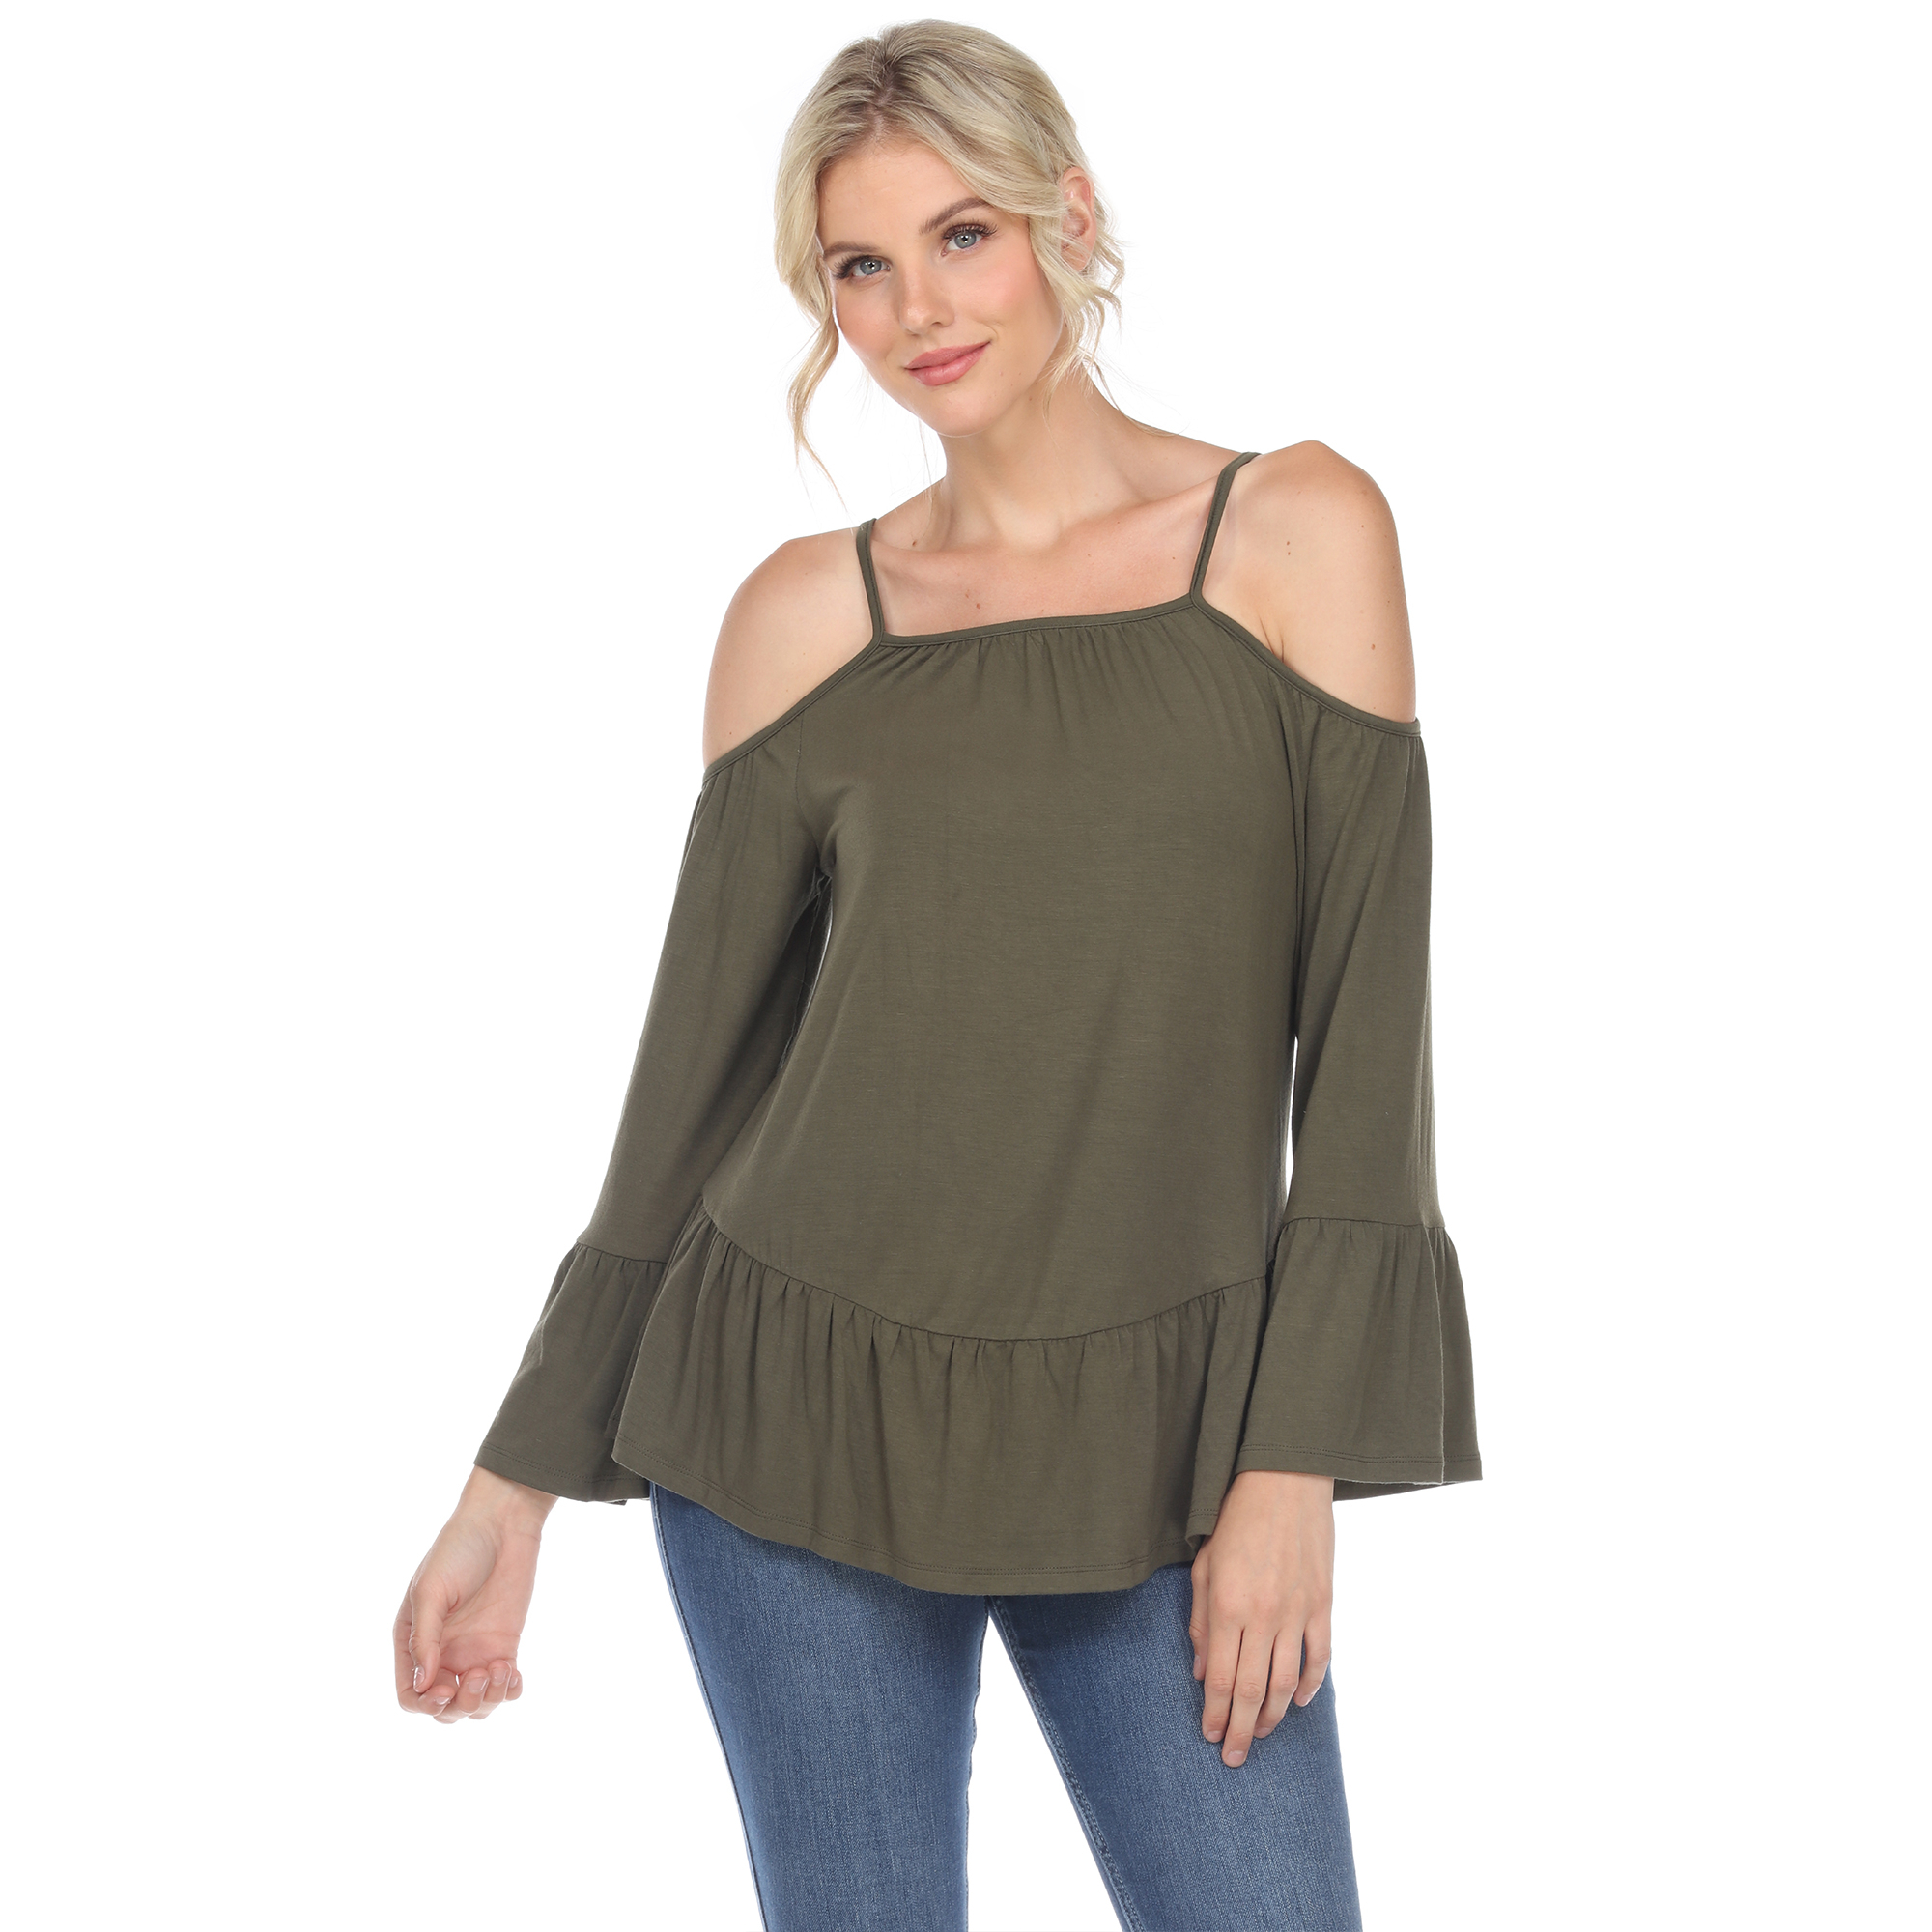 White Mark Women's Cold Shoulder Ruffle Sleeve Top - Olive, 2X